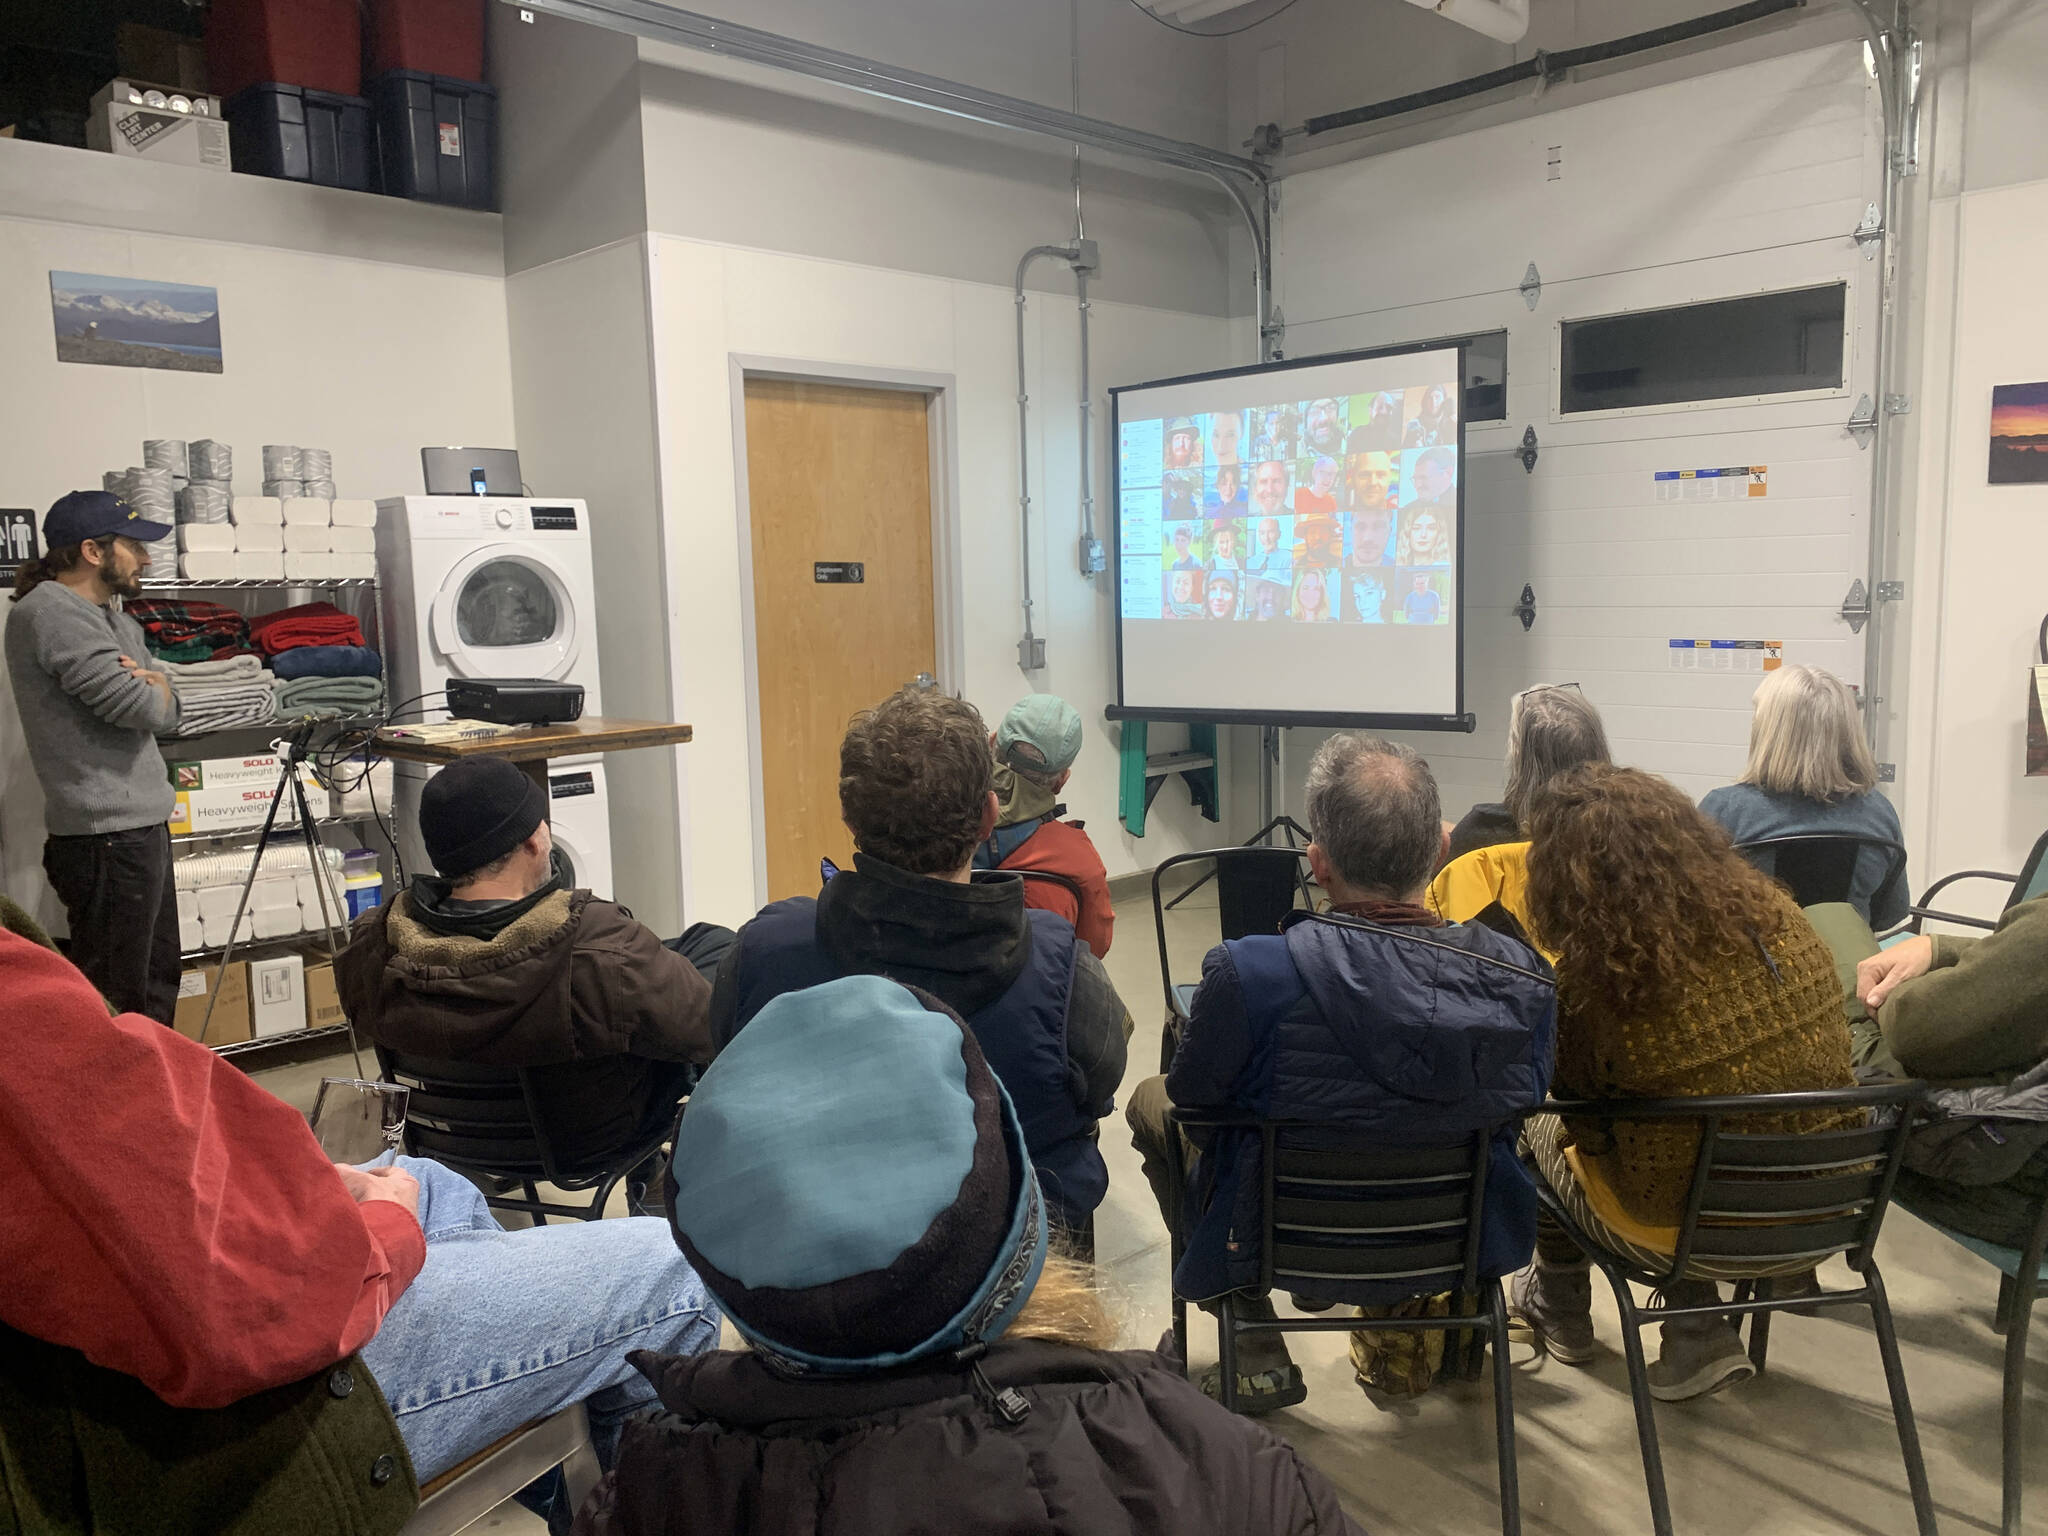 Community members gather at Grace Ridge Brewing for a presentation by Lucas Wilcox about his humanitarian efforts in Ukraine and other places, On December 8, 2022, in Homer, Alaska. (Photo by Christina Whiting/Homer News)